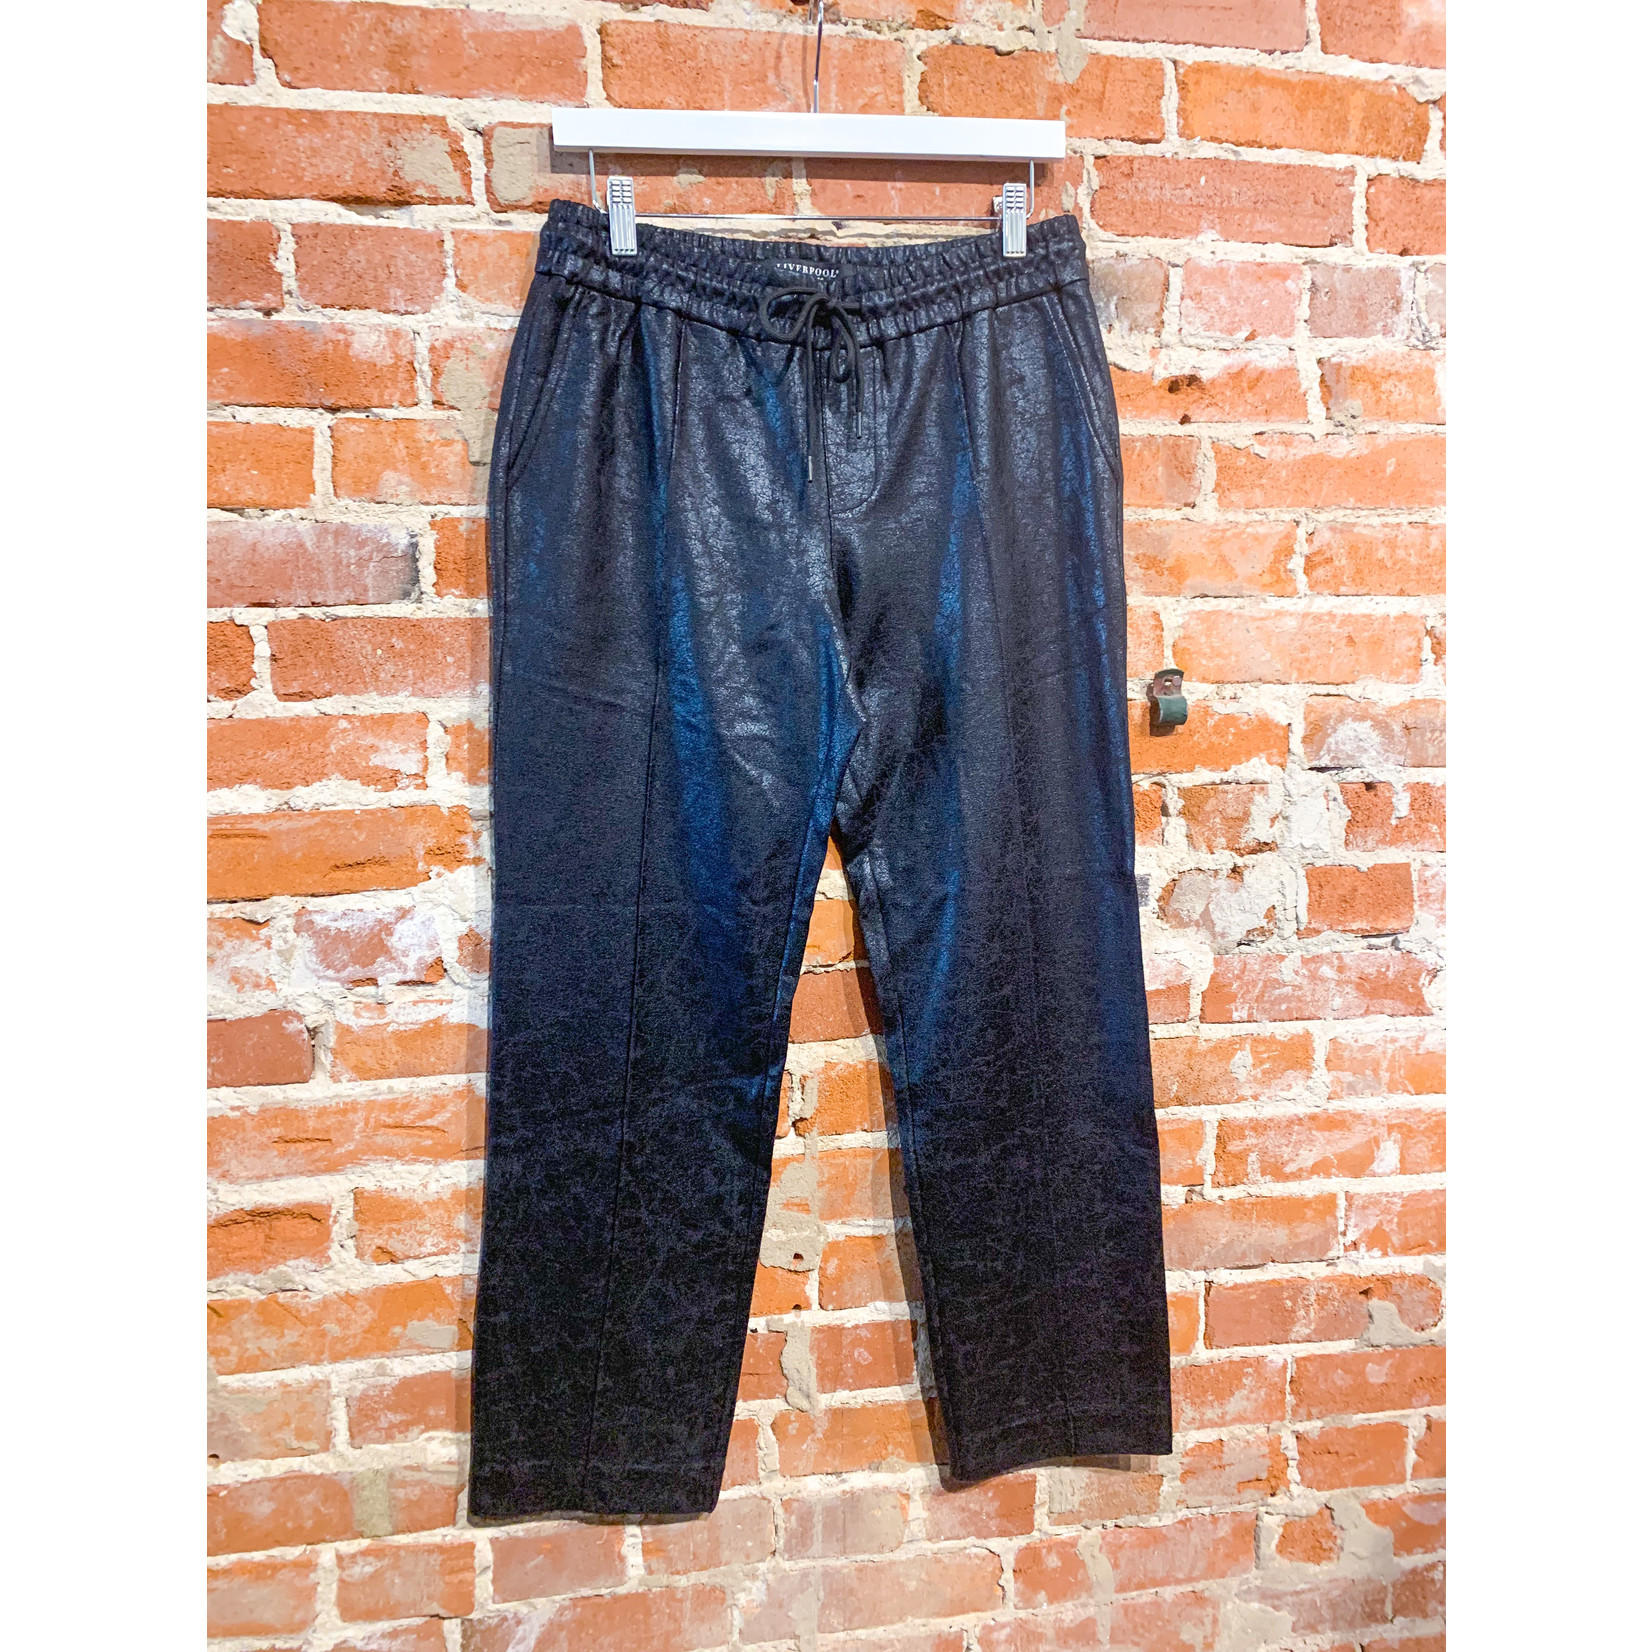 Liverpool Jeans Company Pull On Ankle Trouser W/Pin Tucks